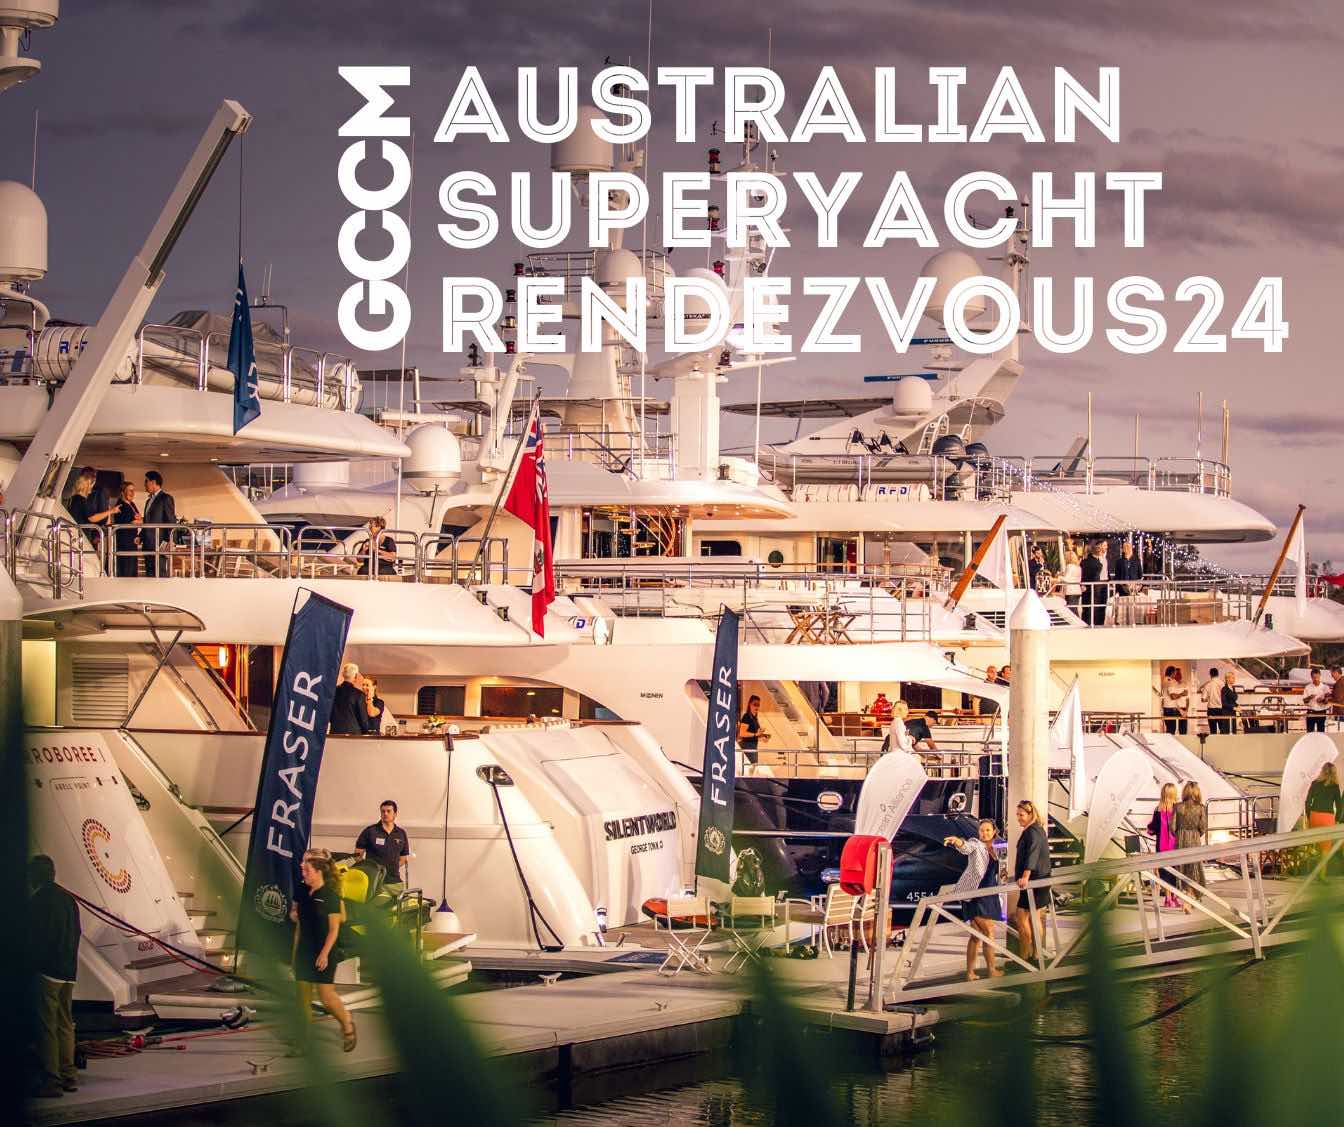 The Australian Superyacht Rendezvous is back at GCCM!